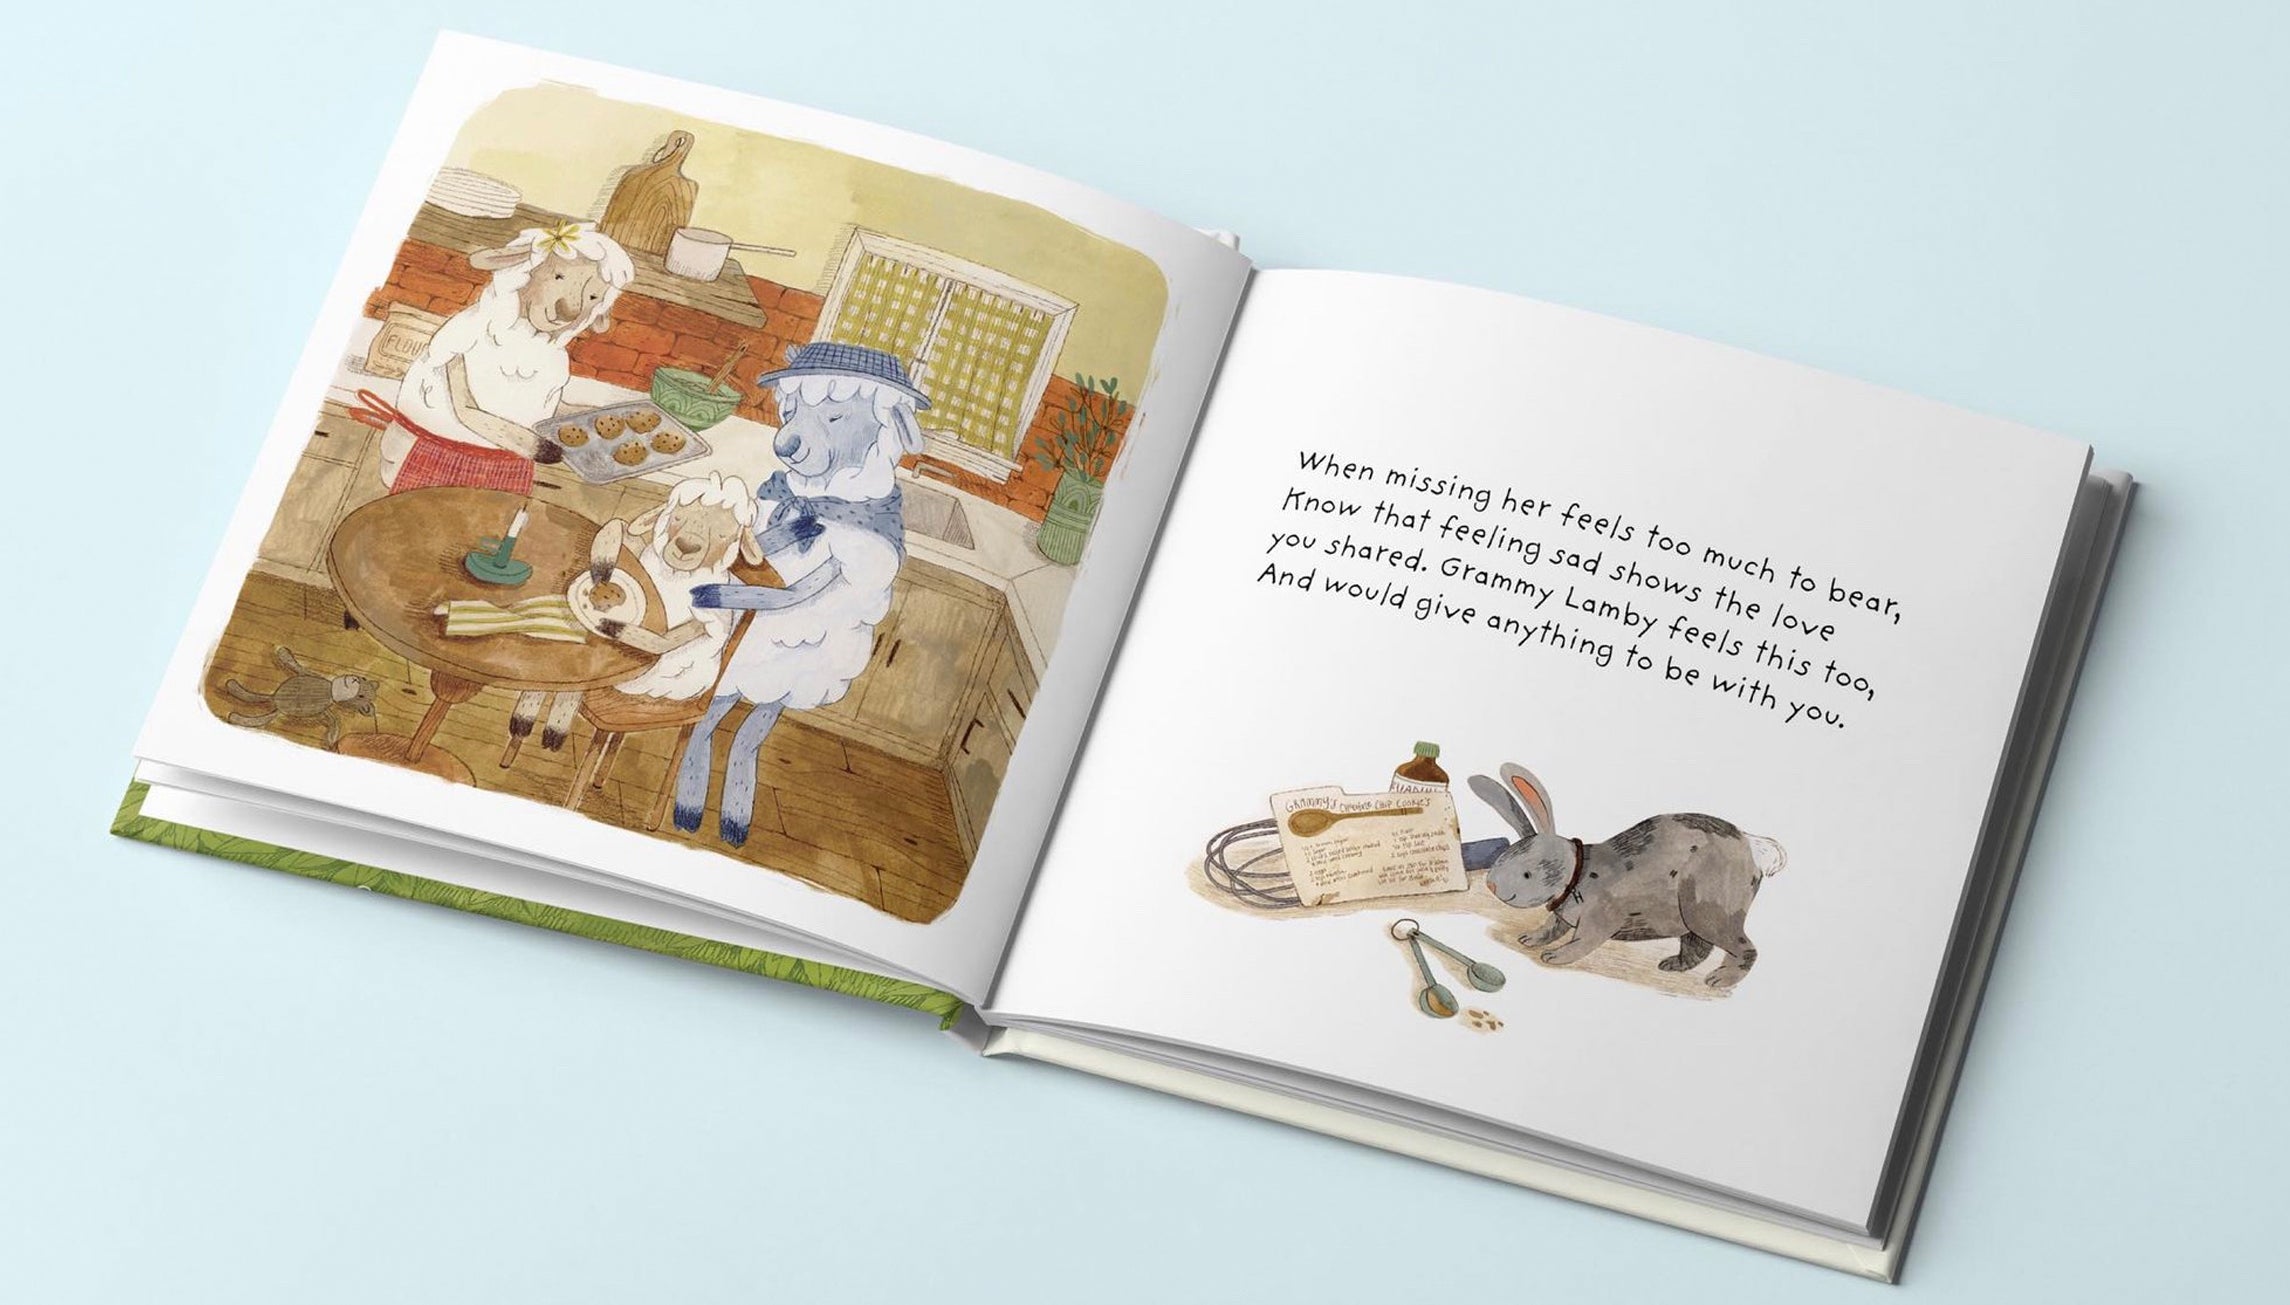 Grammy Lamby Illustrated Book